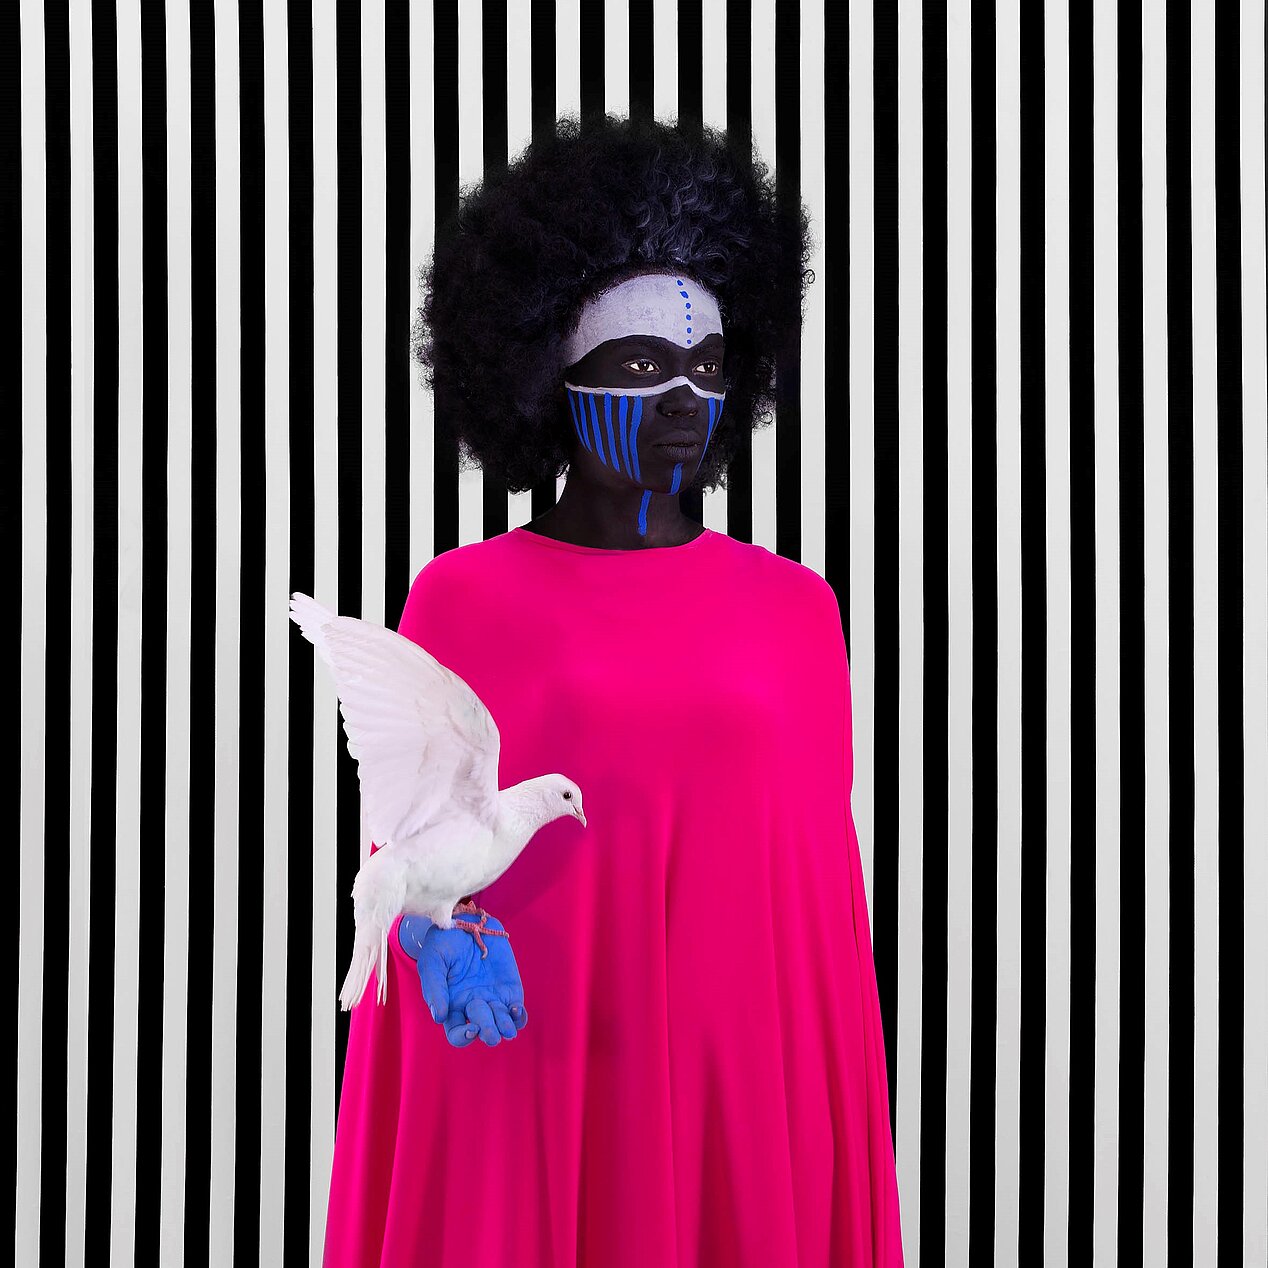 The picture shows the artist Aïda Muluneh in a pink dress. Her face is painted white and blue, her right hand is painted blue. A dove is sitting on her right hand. The background has black and white stripes.